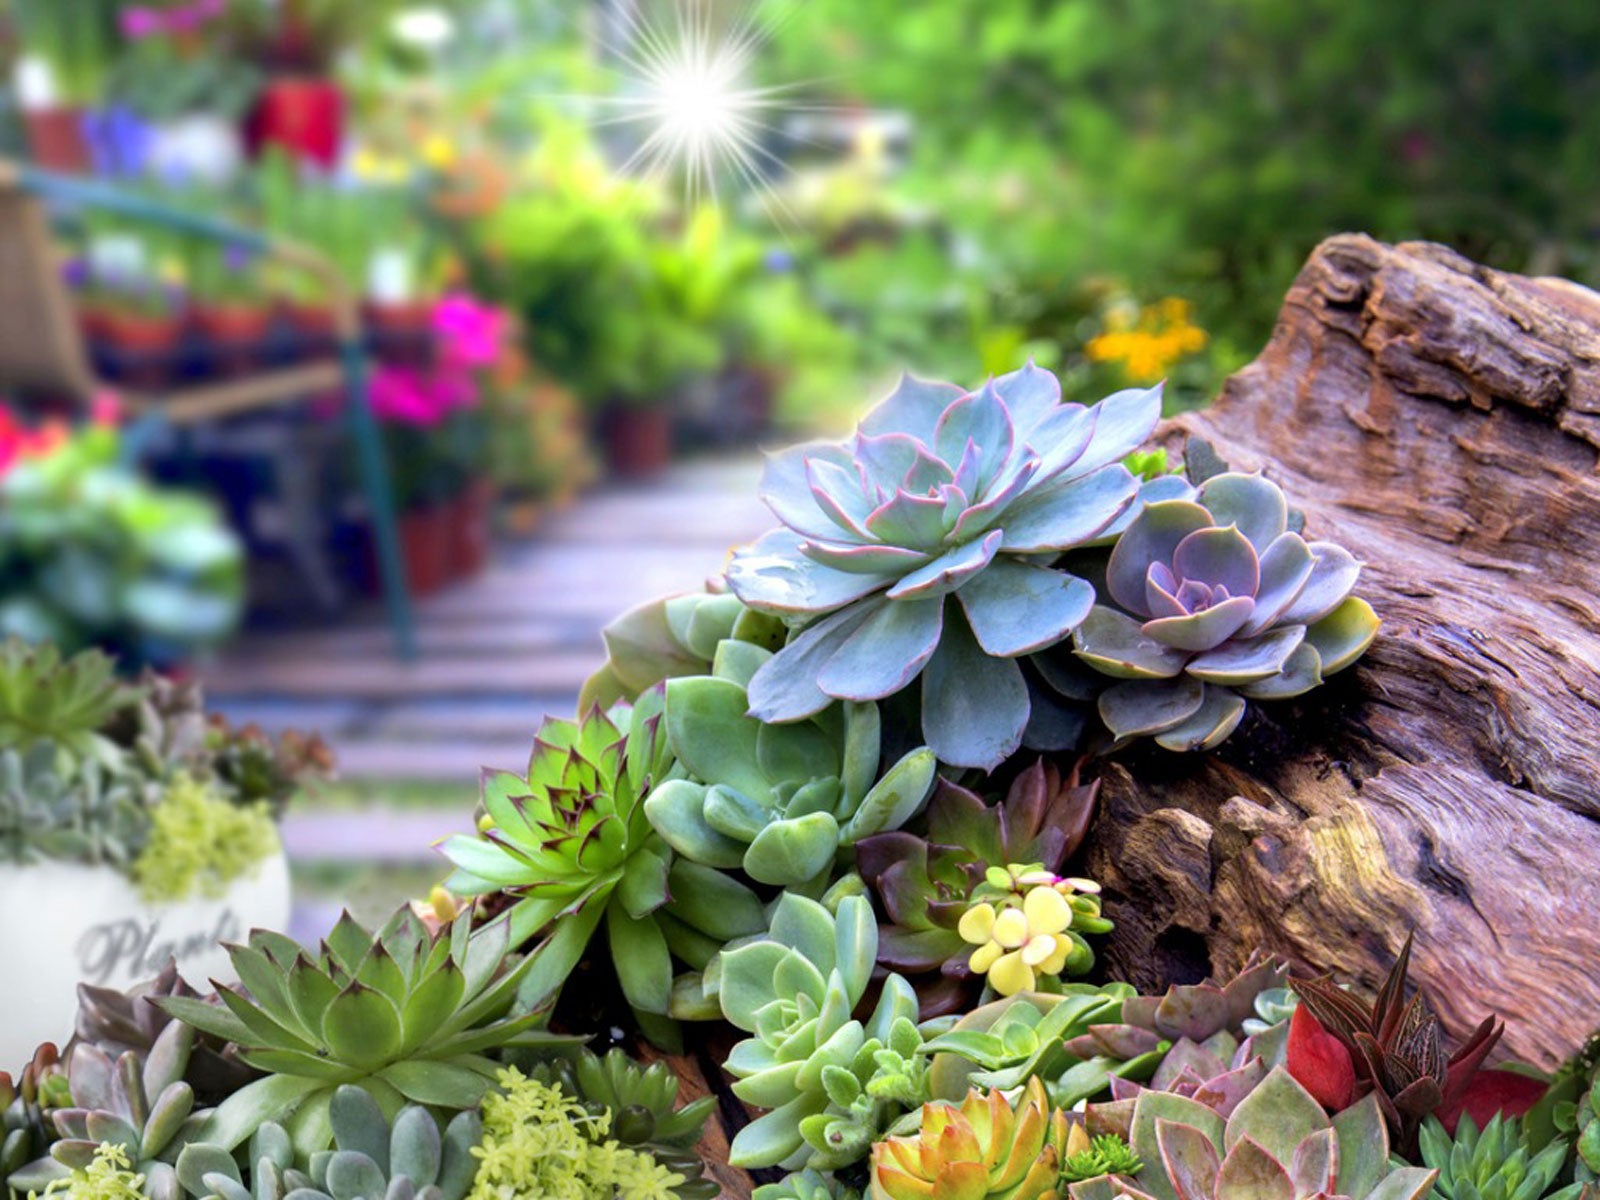 How To Care For Succulents Outdoors